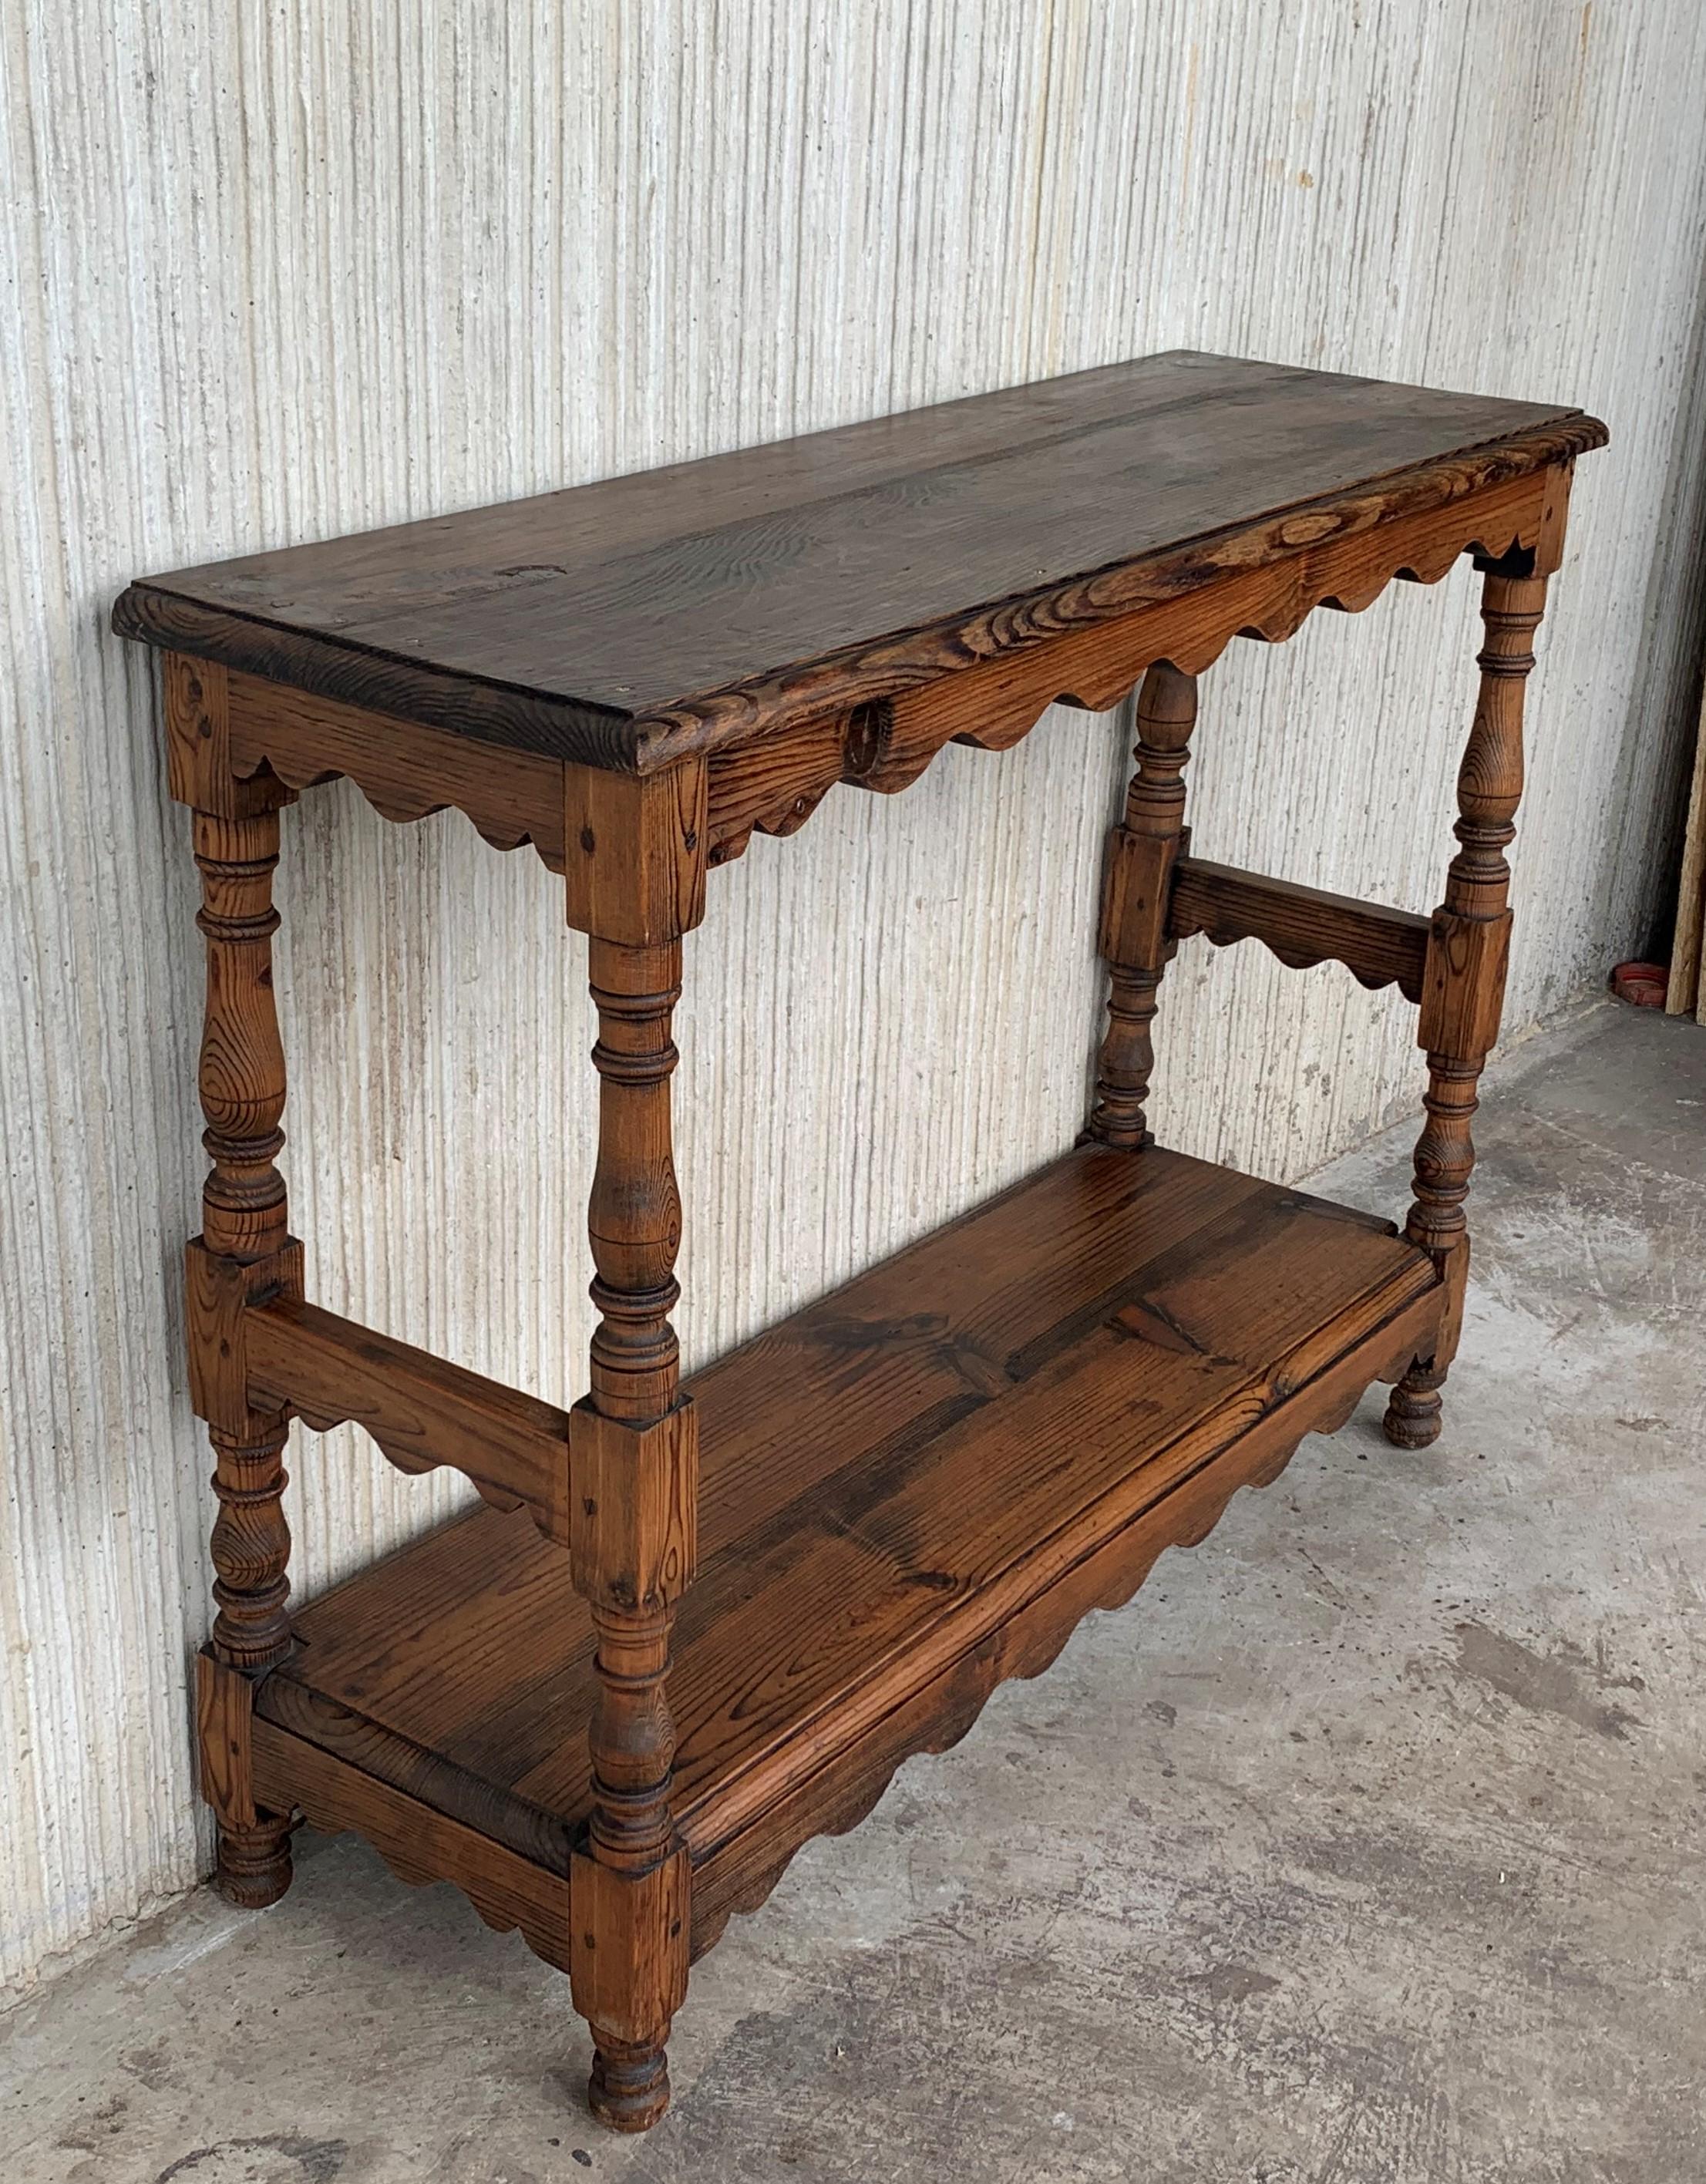 20th Century Country French Two-Tier Console Table in Old Pine